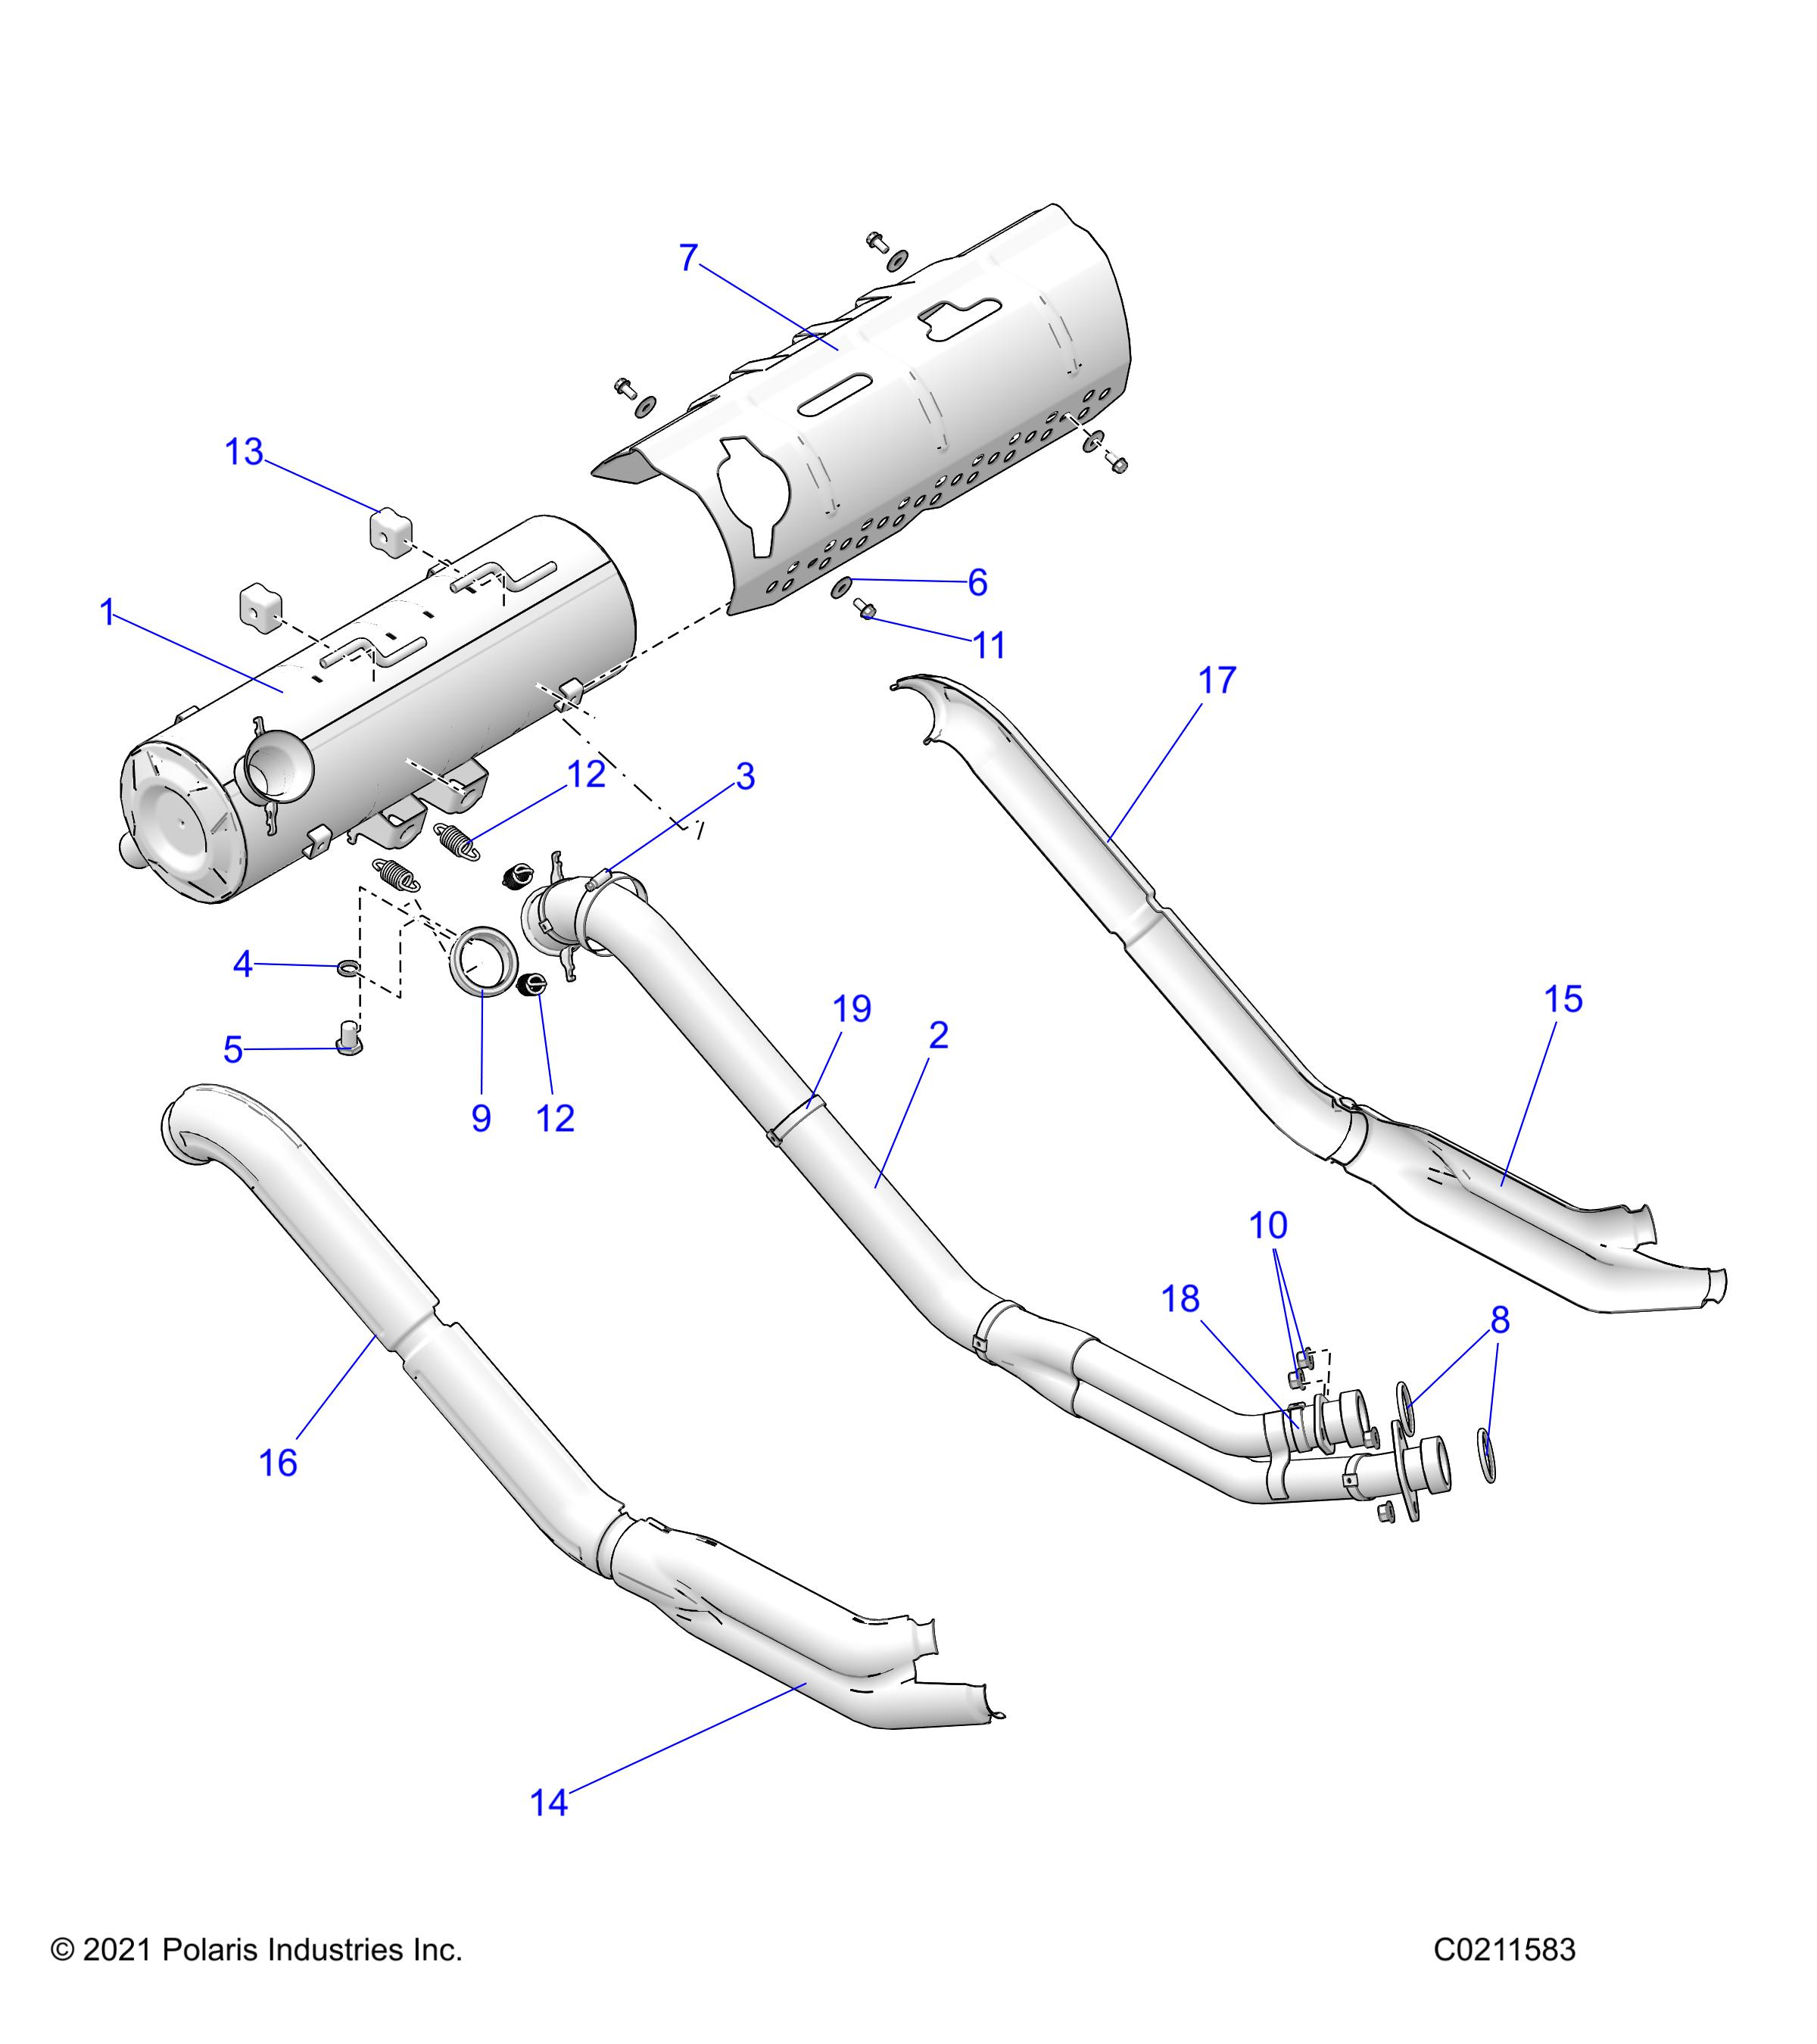 Part Number : 5263747 EXHAUST SHIELD SILENCER